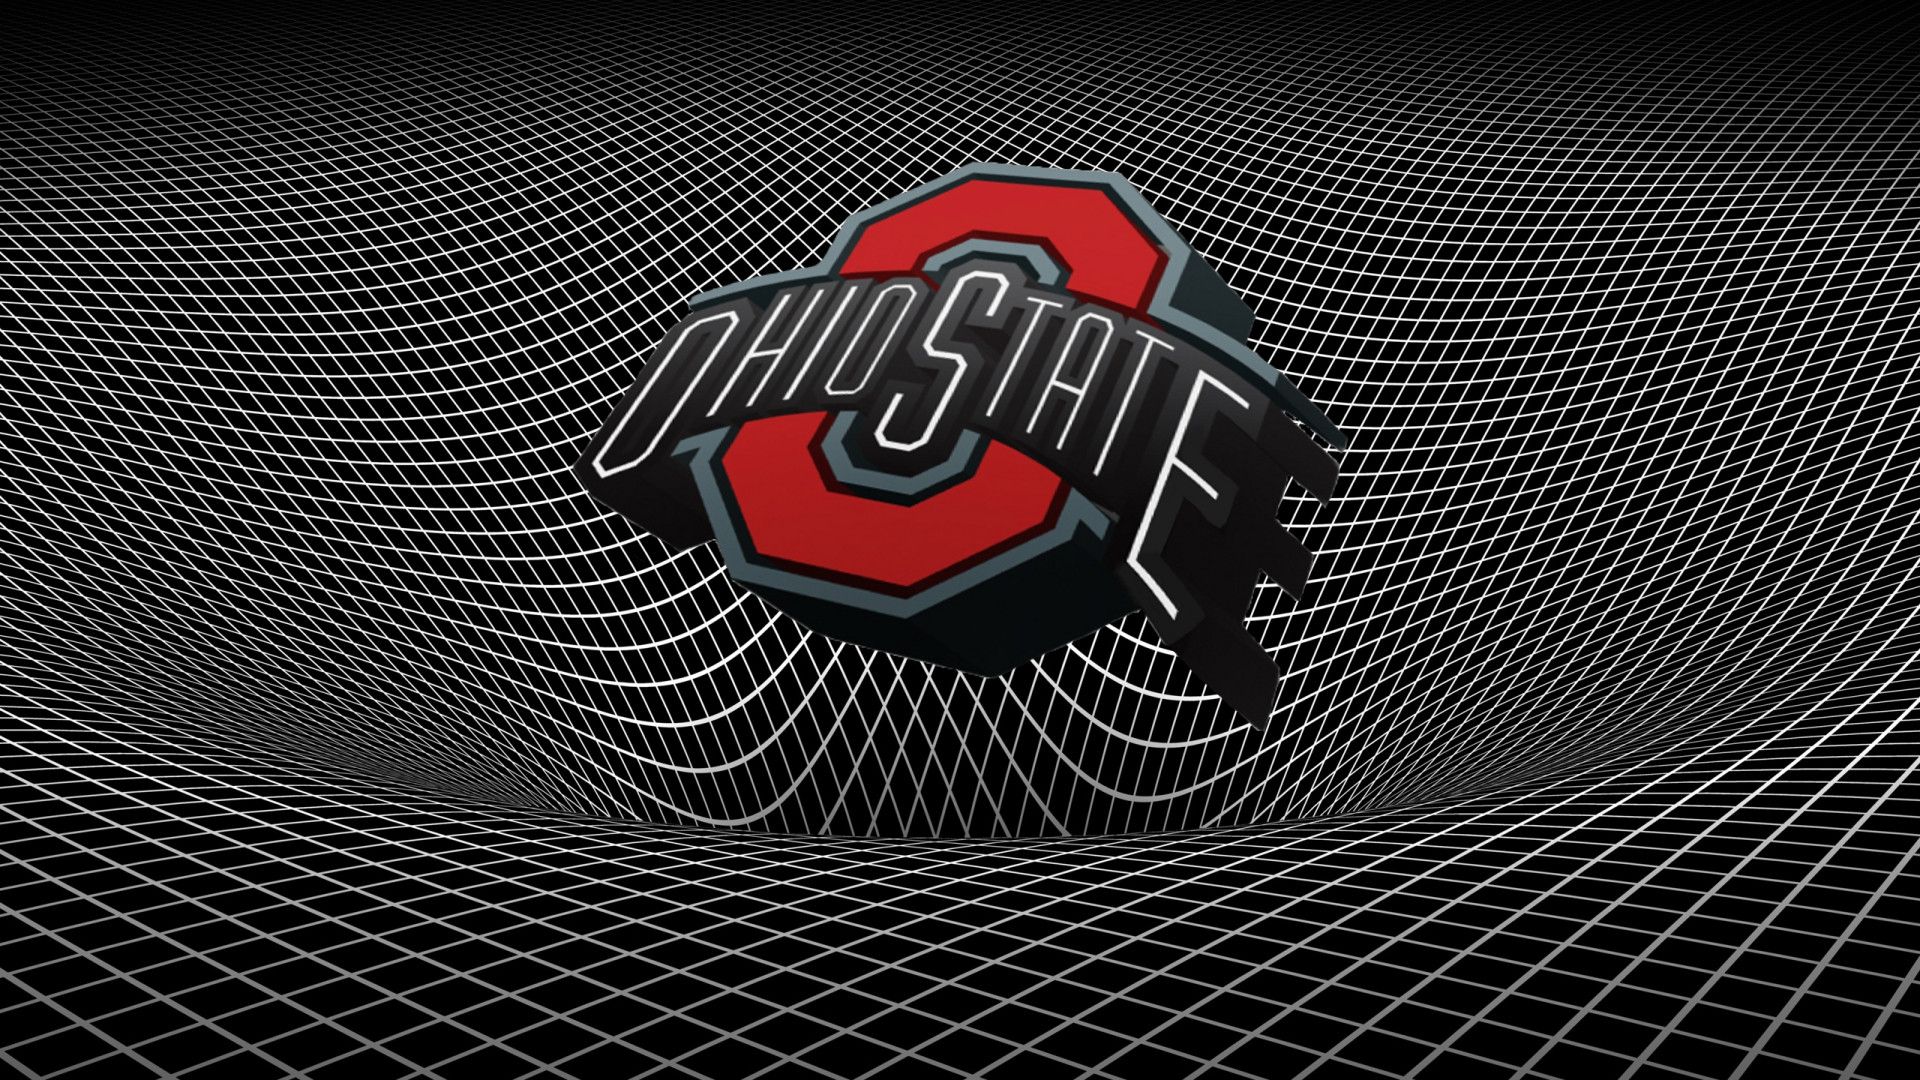 Ohio State Buckeyes Wallpapers | Wallpapers, Backgrounds, Images ...